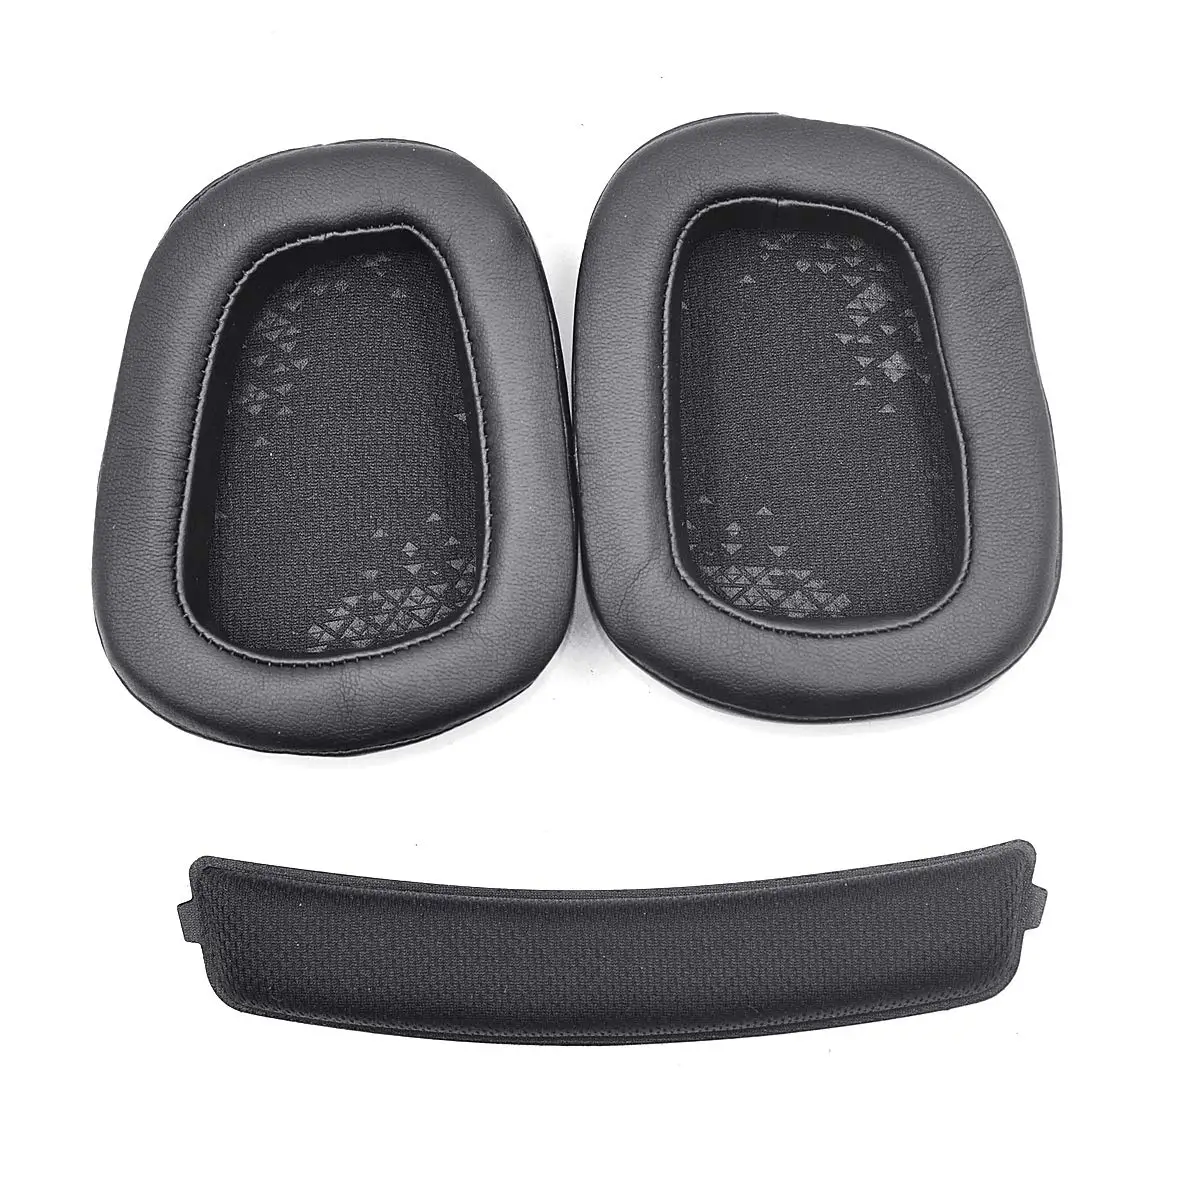 Replacement Ear Pads Cushions and Headband Kit for Logitech G633 G933 G635 G633S G933S Gaming Headset Earpads